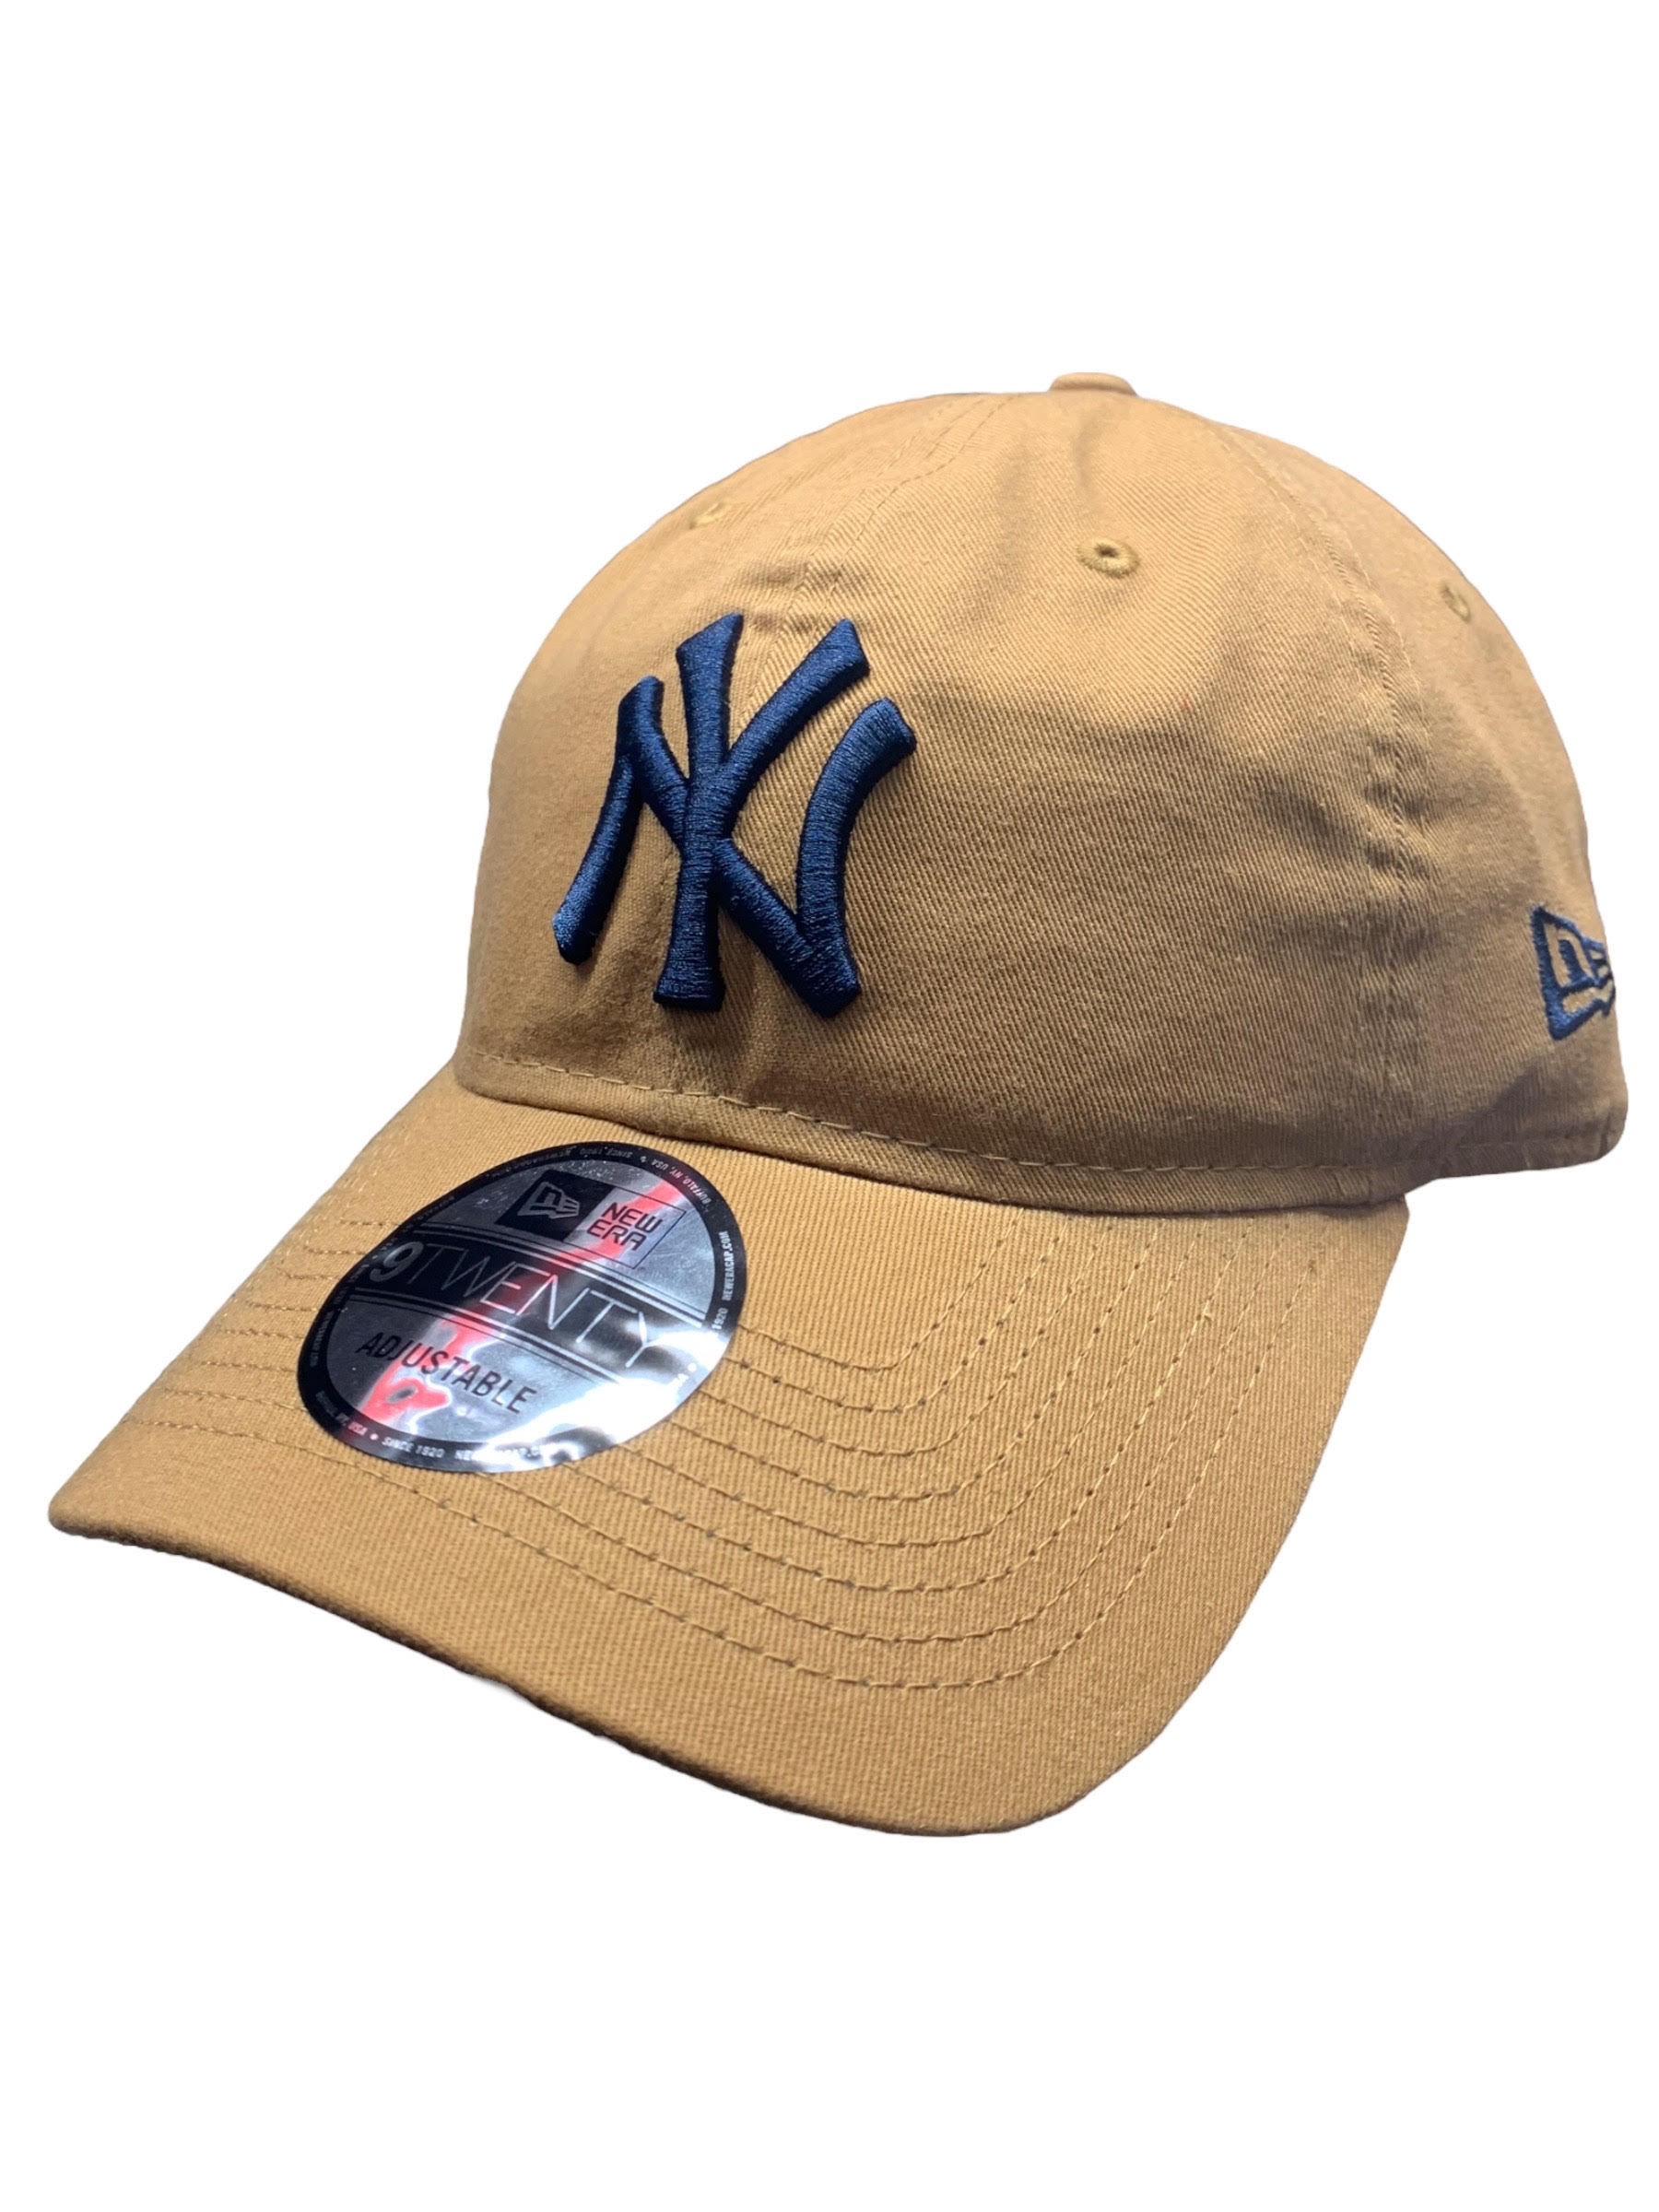 Youth San Diego Padres The League 9Forty Brown Adjustable Hat